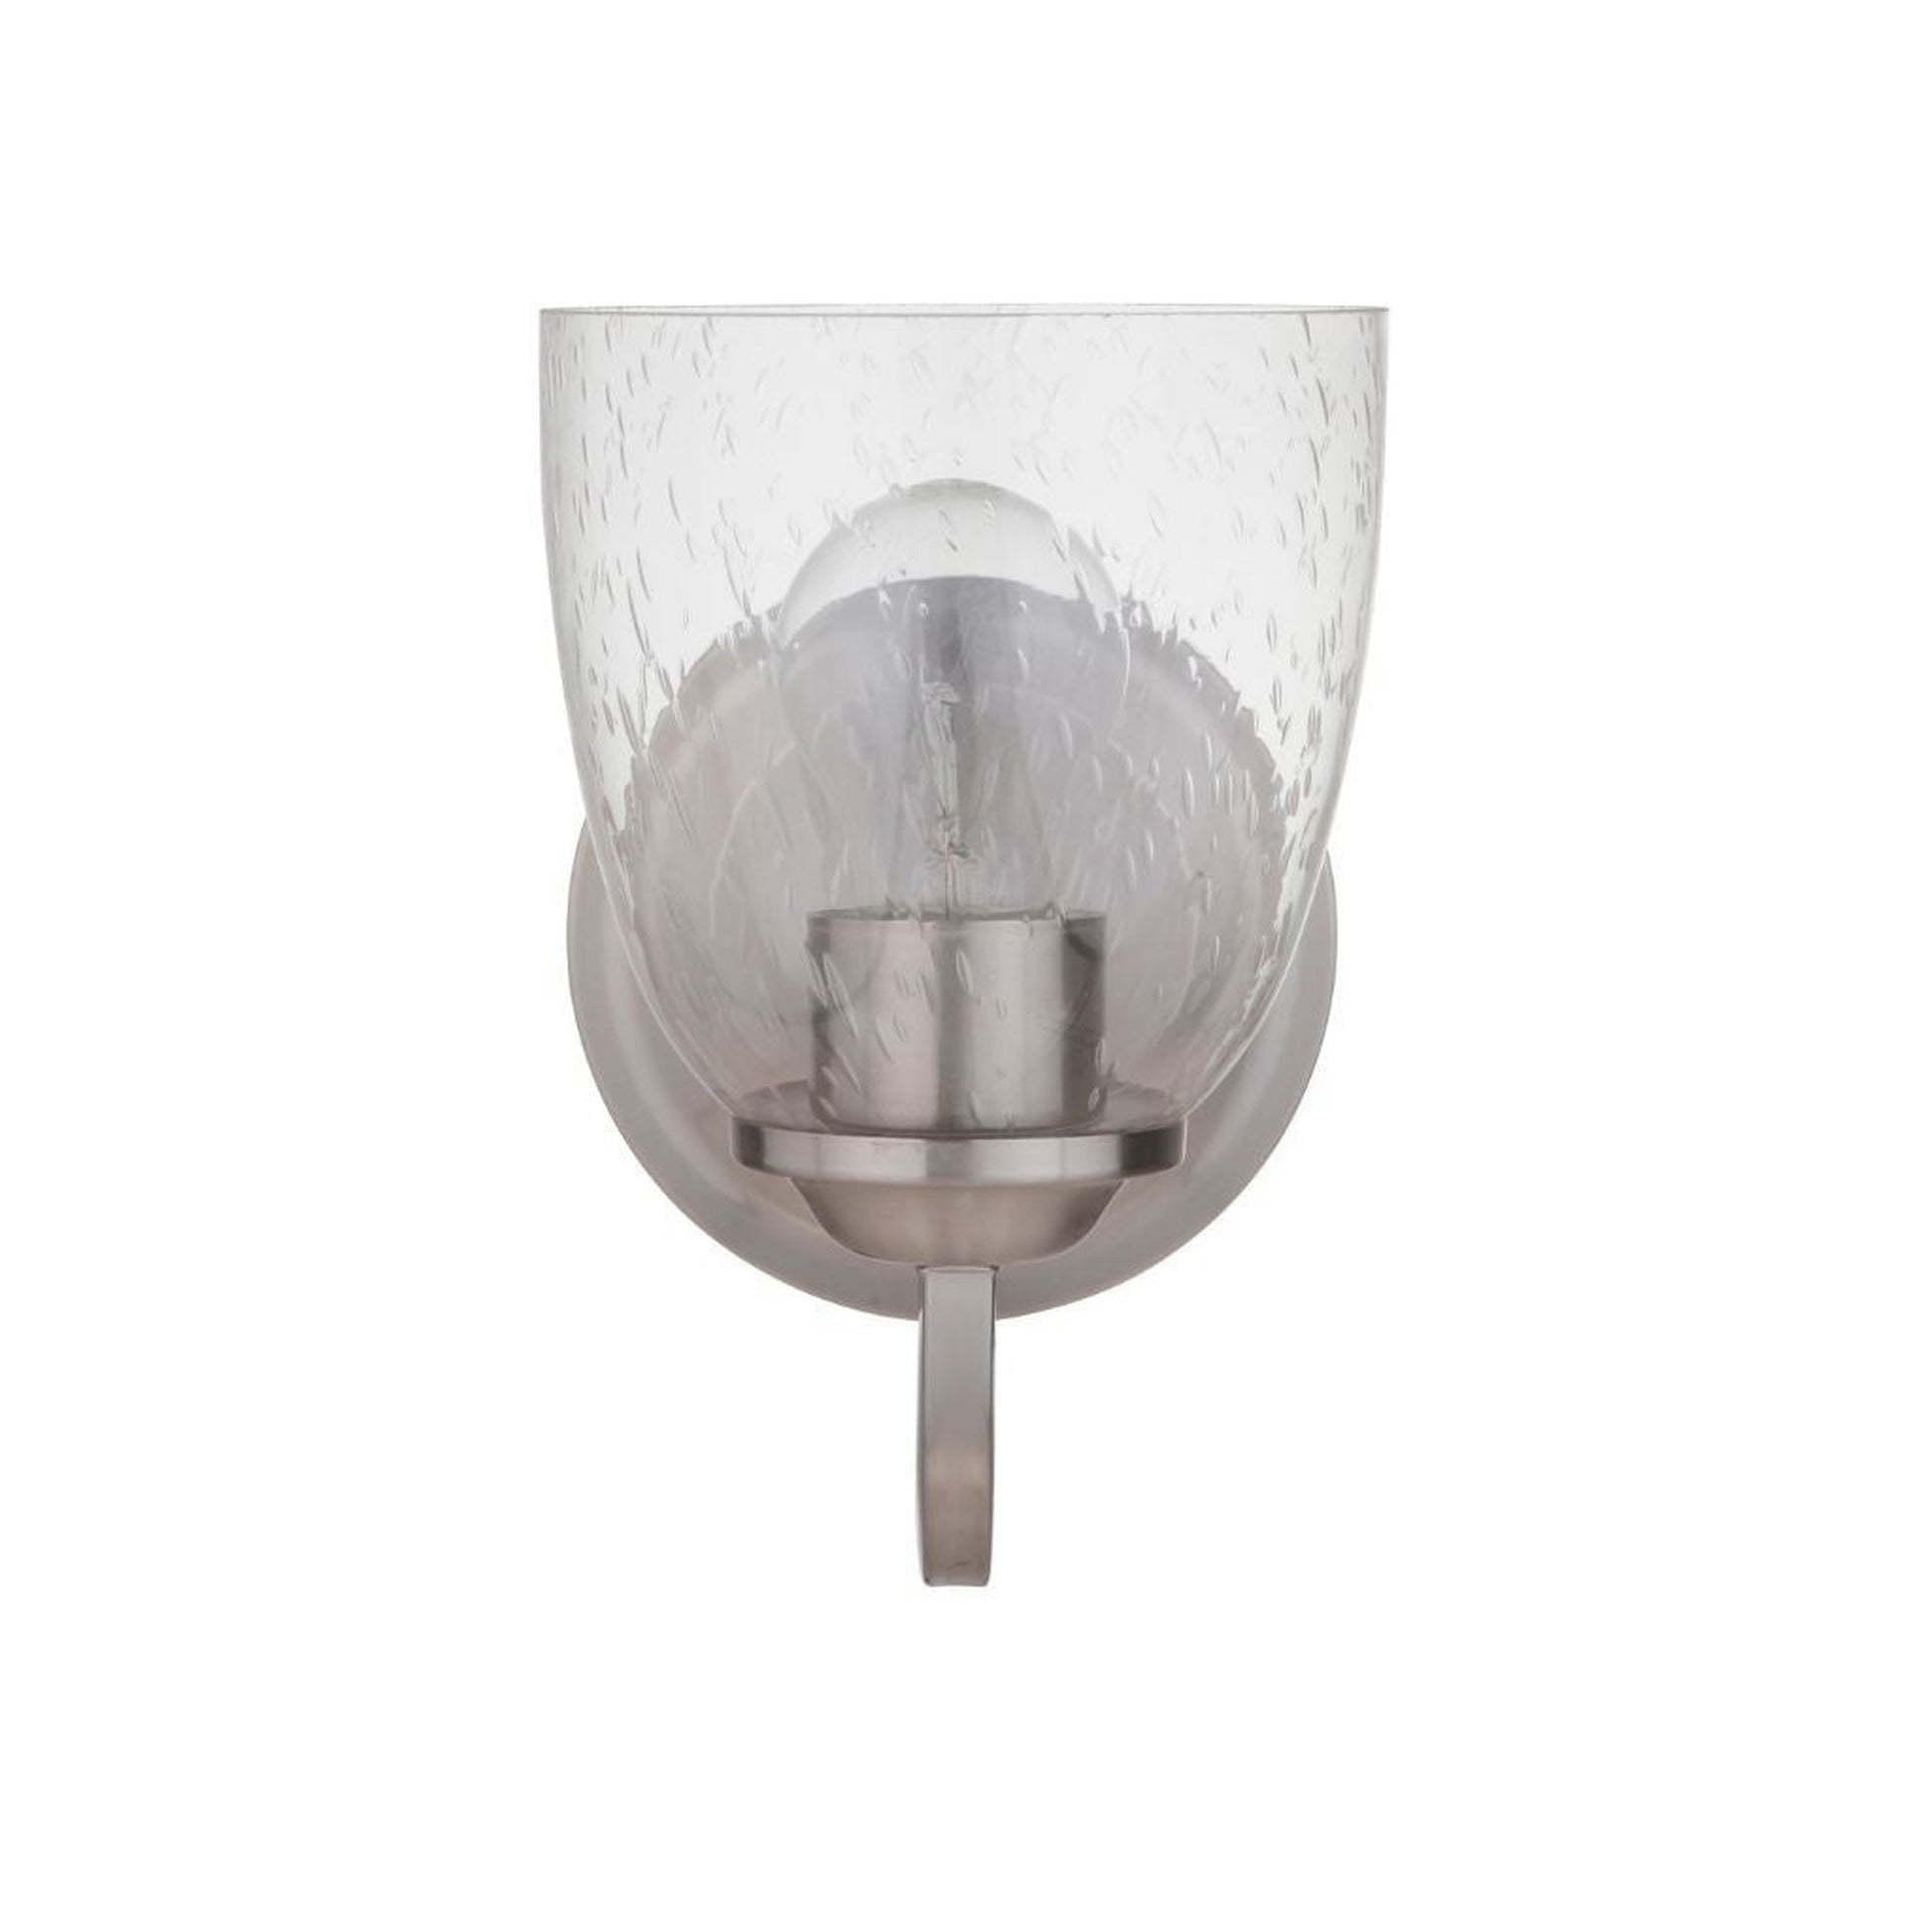 Craftmade Serene 6" x 9" 1-Light Brushed Polished Nickel Wall Sconce With Clear Seeded Glass Shade